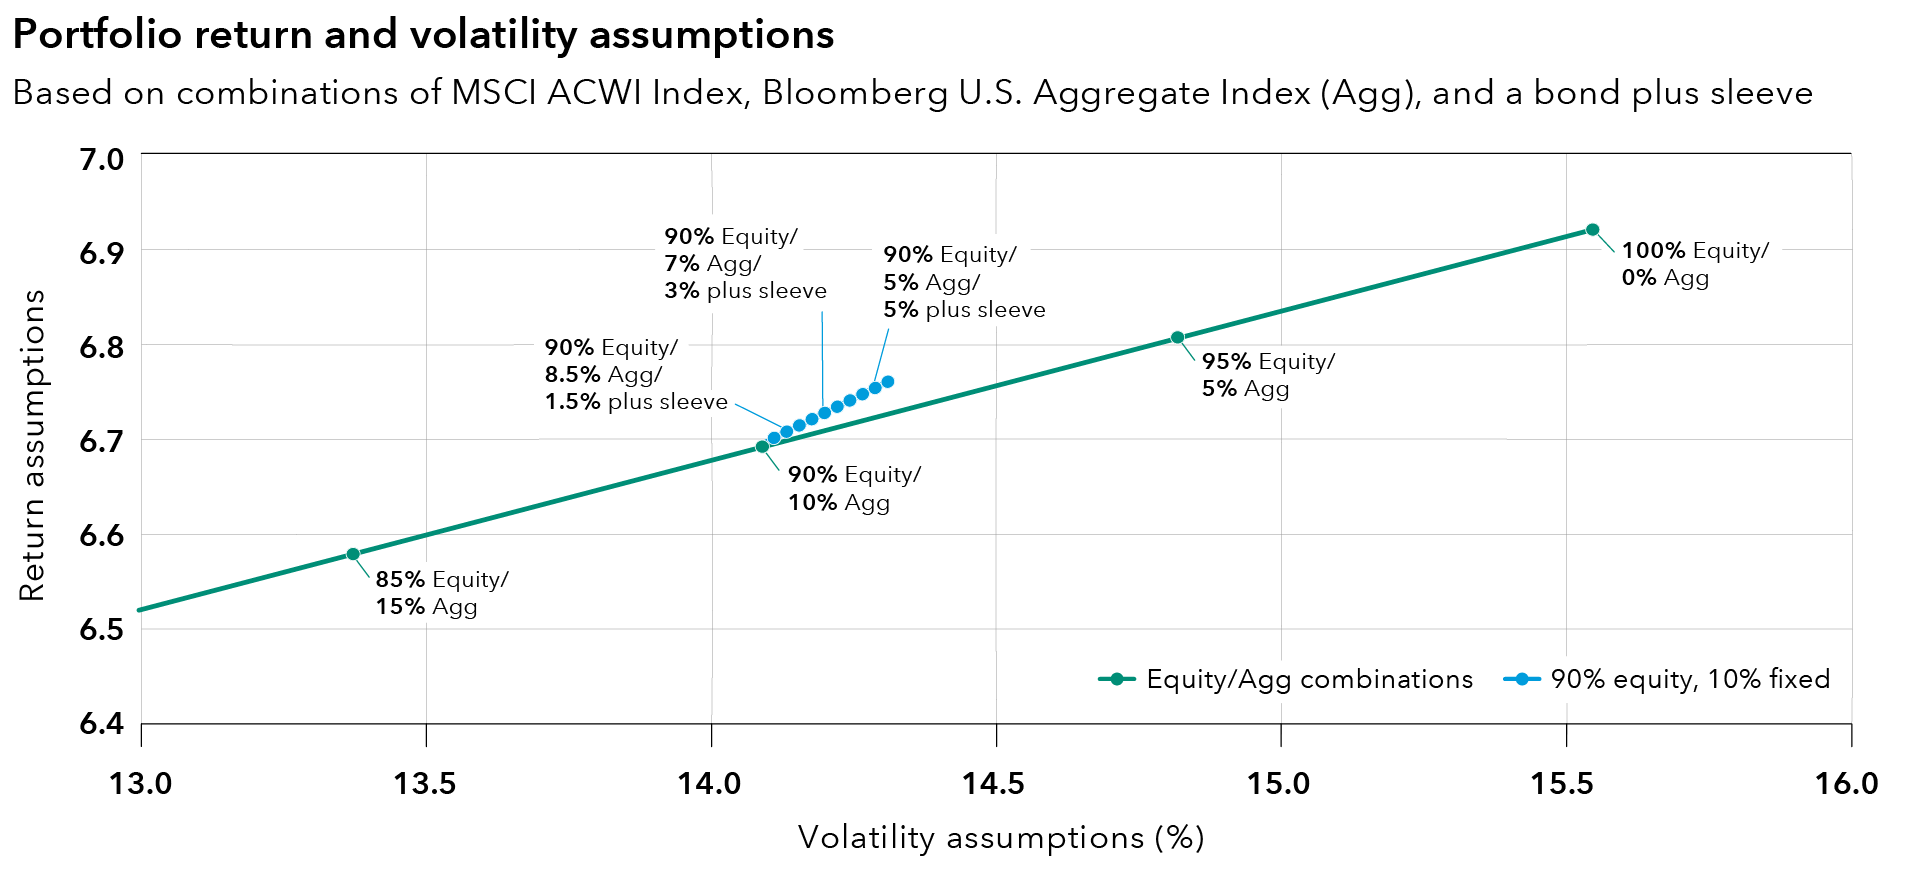 This is a scatterplot chart with return assumptions (as a percentage) shown on the Y axis and volatility assumptions, or standard deviation shown on the X axis (as a percentage). The chart shows two types of dots. There are green dots representing portfolios that are differently sized combinations of two components: The MSCI All Country World (ACWI) Index, representing global equity, and the Agg. The green-dotted portfolios do not include any plus sleeve allocation. The labeled green-dot portfolios range from 85% equity/15% Agg at the far left to 100% equity (ACWI)/0% Agg at the far right. The green dots are connected to form a green line. There are also blue dots that represent a portfolio of 90% equity with a fixed income allocation consisting of two varying components: a) Bloomberg U.S. Aggregate Index (Agg) and b) a plus sleeve with three equally weighted components: 1) 50% J.P. Morgan Emerging Markets Bond Index Global Diversified Index/50% J.P. Morgan GBI-EM Global Diversified, 2) Bloomberg U.S. High Yield Index and 3) Bloomberg U.S. TIPS Index. The blue dots are connected to form a blue line. The blue line starts at an intersection point of the green line, with a green-line portfolio of 90% equity/10% Agg. The blue line then extends diagonally to the right, above the green line, ending at the blue dot 90% equity/5% Agg/5% plus sleeve. The blue line terminates above a green-line portfolio consisting of roughly 92% equity/8% Agg (there is no green dot shown at that point). Data for the green dots noted on the chart are as follows – 85% equity (ACWI)/15% Agg: 13.4% volatility, 6.6% return; 90% Equity/10% Agg: 14.1% volatility, 6.7% return; 95% Equity/5% Agg: 14.8% volatility, 6.8% return; 100% Equity/0% Agg:15.6% volatility, 6.9% return. The blue data points noted in the chart are as follows (specified to two decimals given the rounded numbers are the same) – 90% equity/8.5% Agg/1.5% plus sleeve: 14.16% volatility, 6.71% return; 90% equity/7% Agg/3% plus sleeve: 14.22% volatility, 6.73% return; 90% equity/5% Agg/5% plus sleeve: 14.30% volatility, 6.75% return.